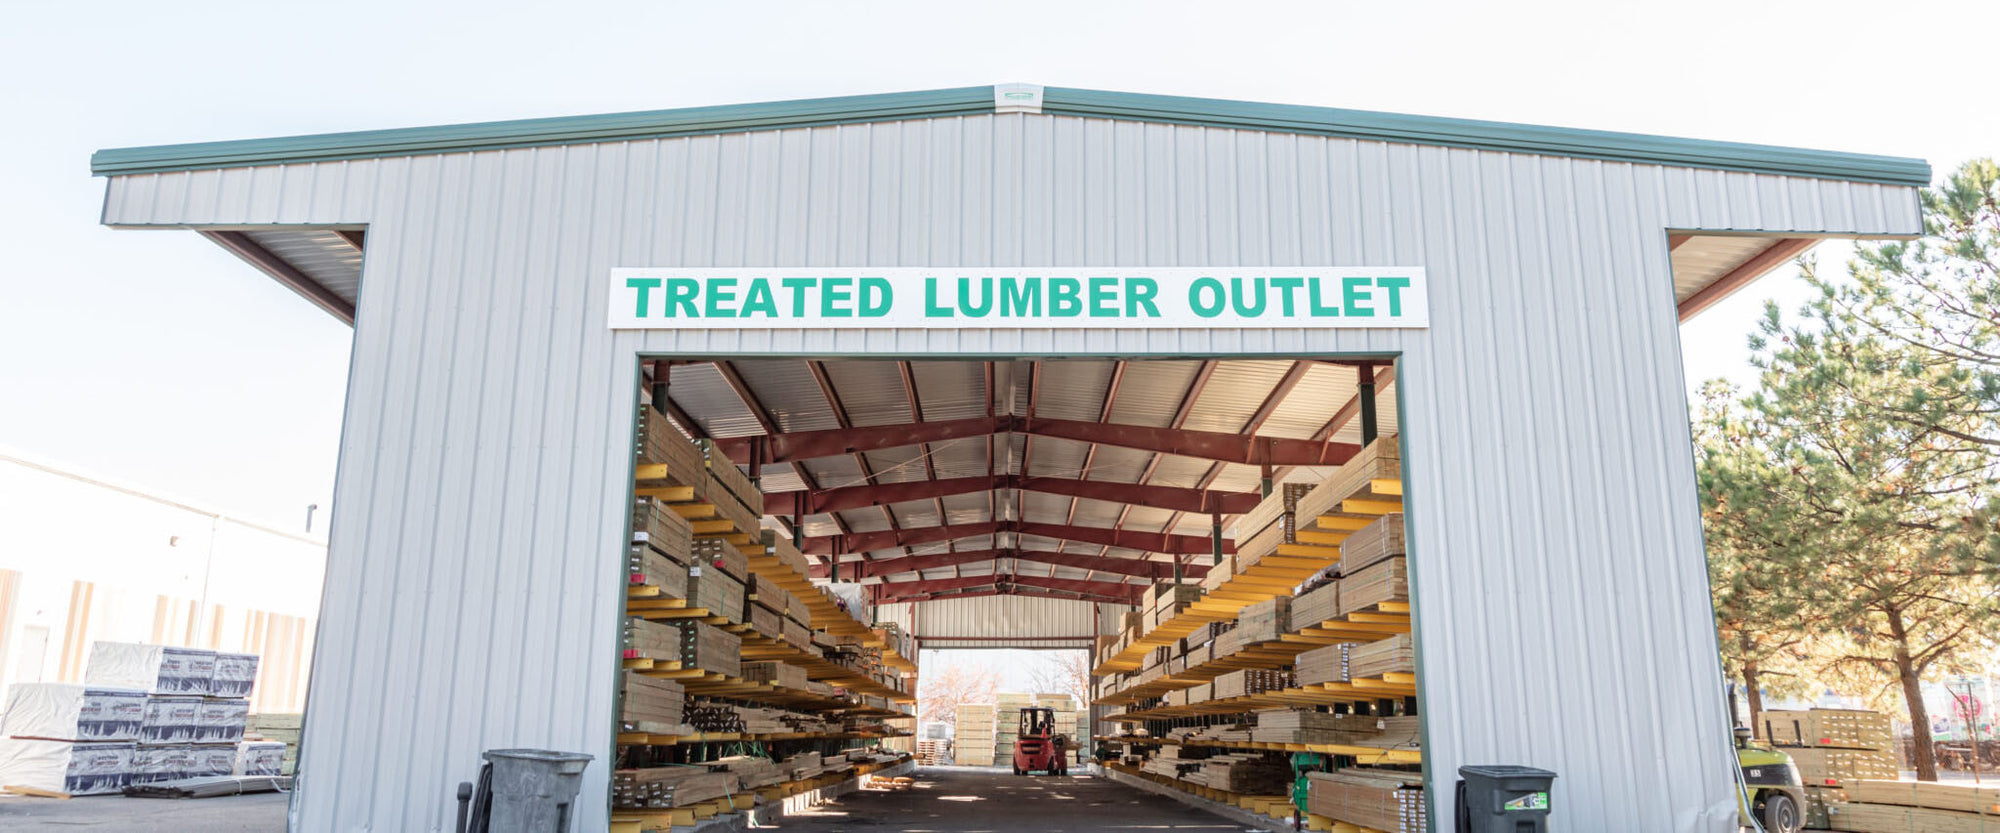 Treated Lumber Outlet